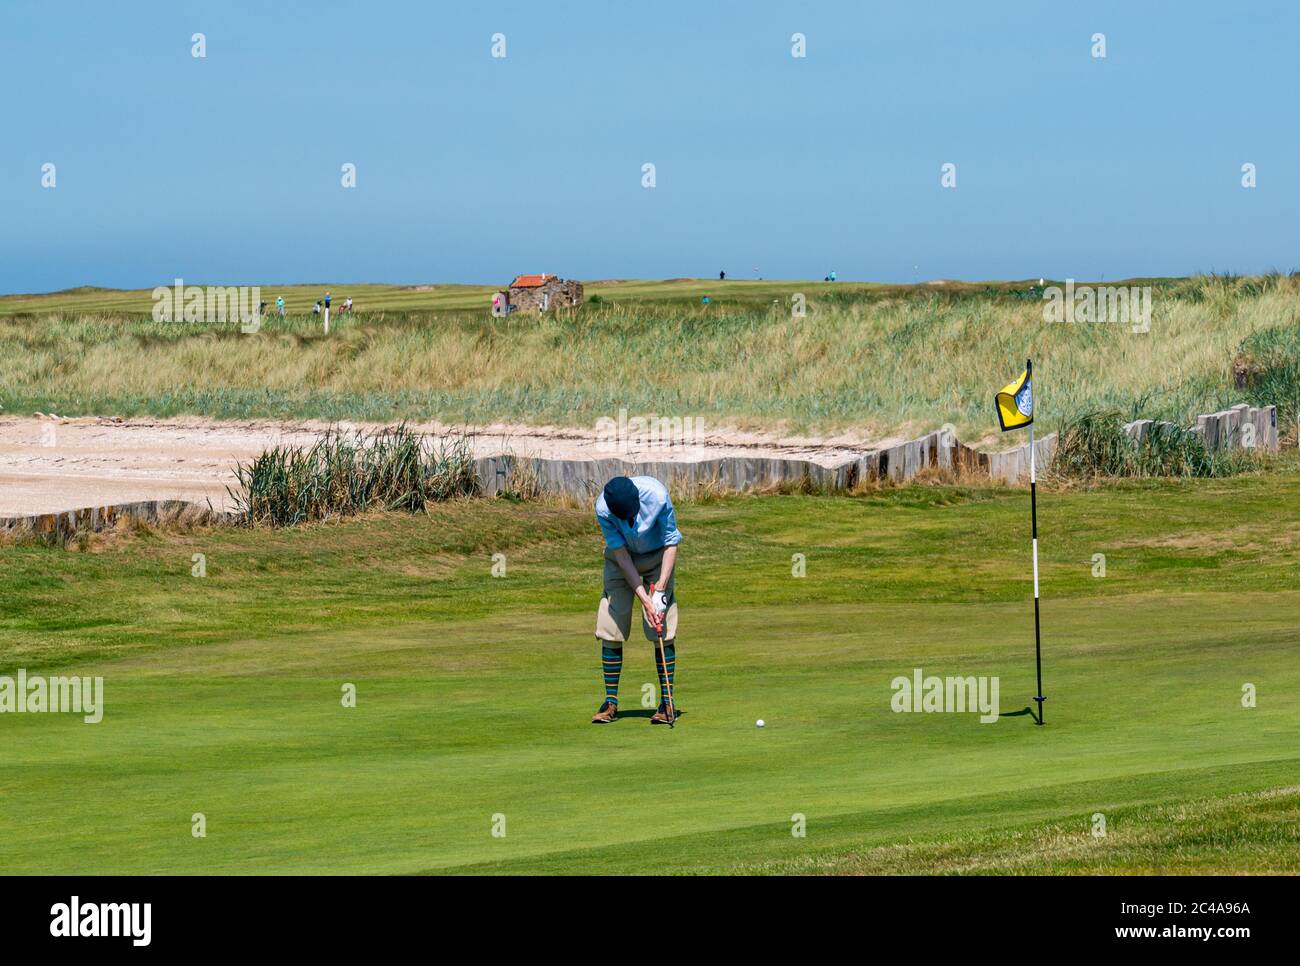 Aberlady, East Lothian, Scotland, United Kingdom, 25th June 2020. UK Weather: hot sunshine in Craigielaw golf course with a man dressed in plus fours on a putting green Stock Photo